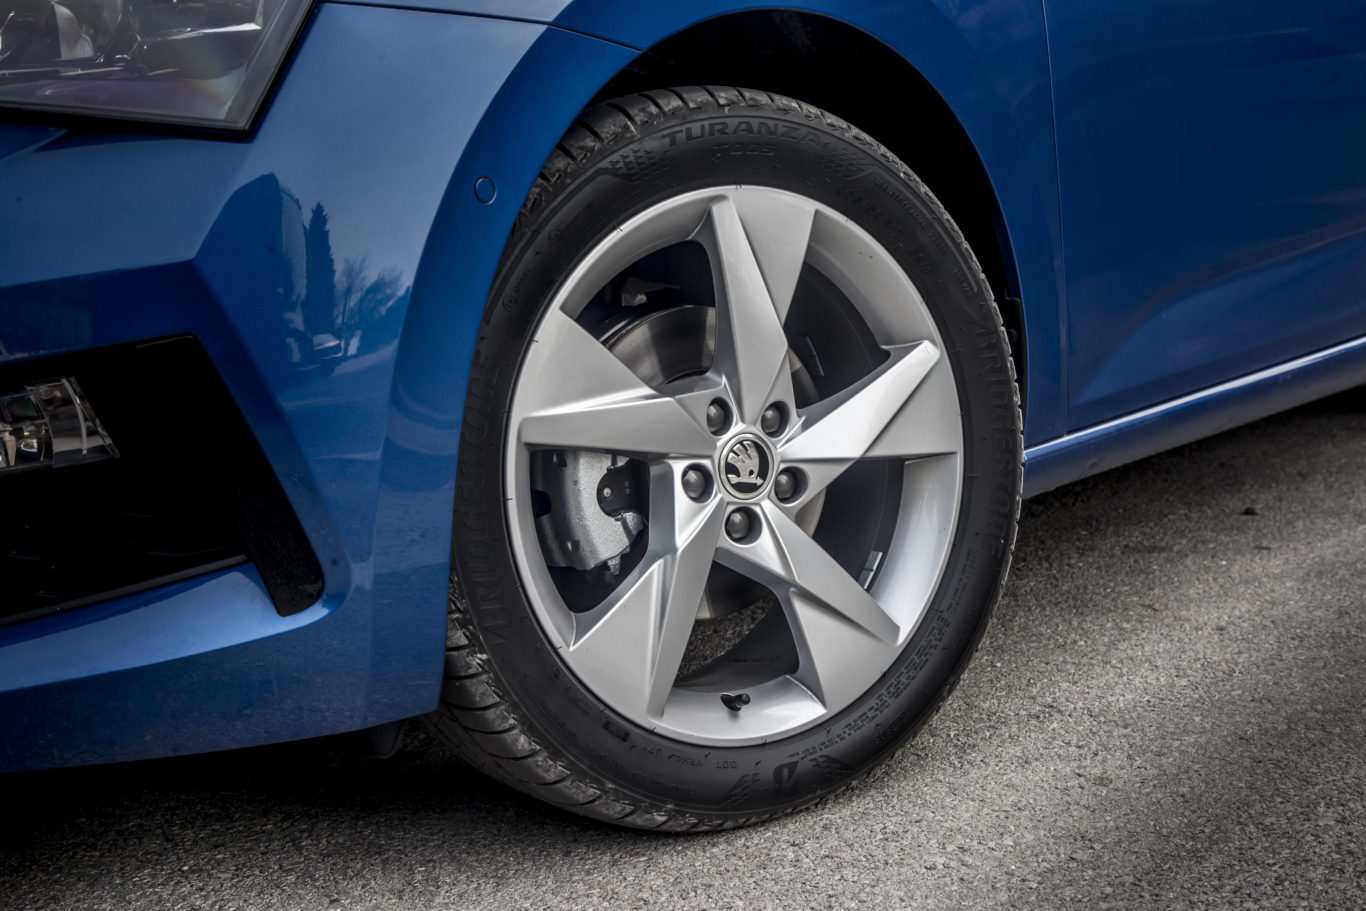 Large alloy wheels give the Scala a premium feel